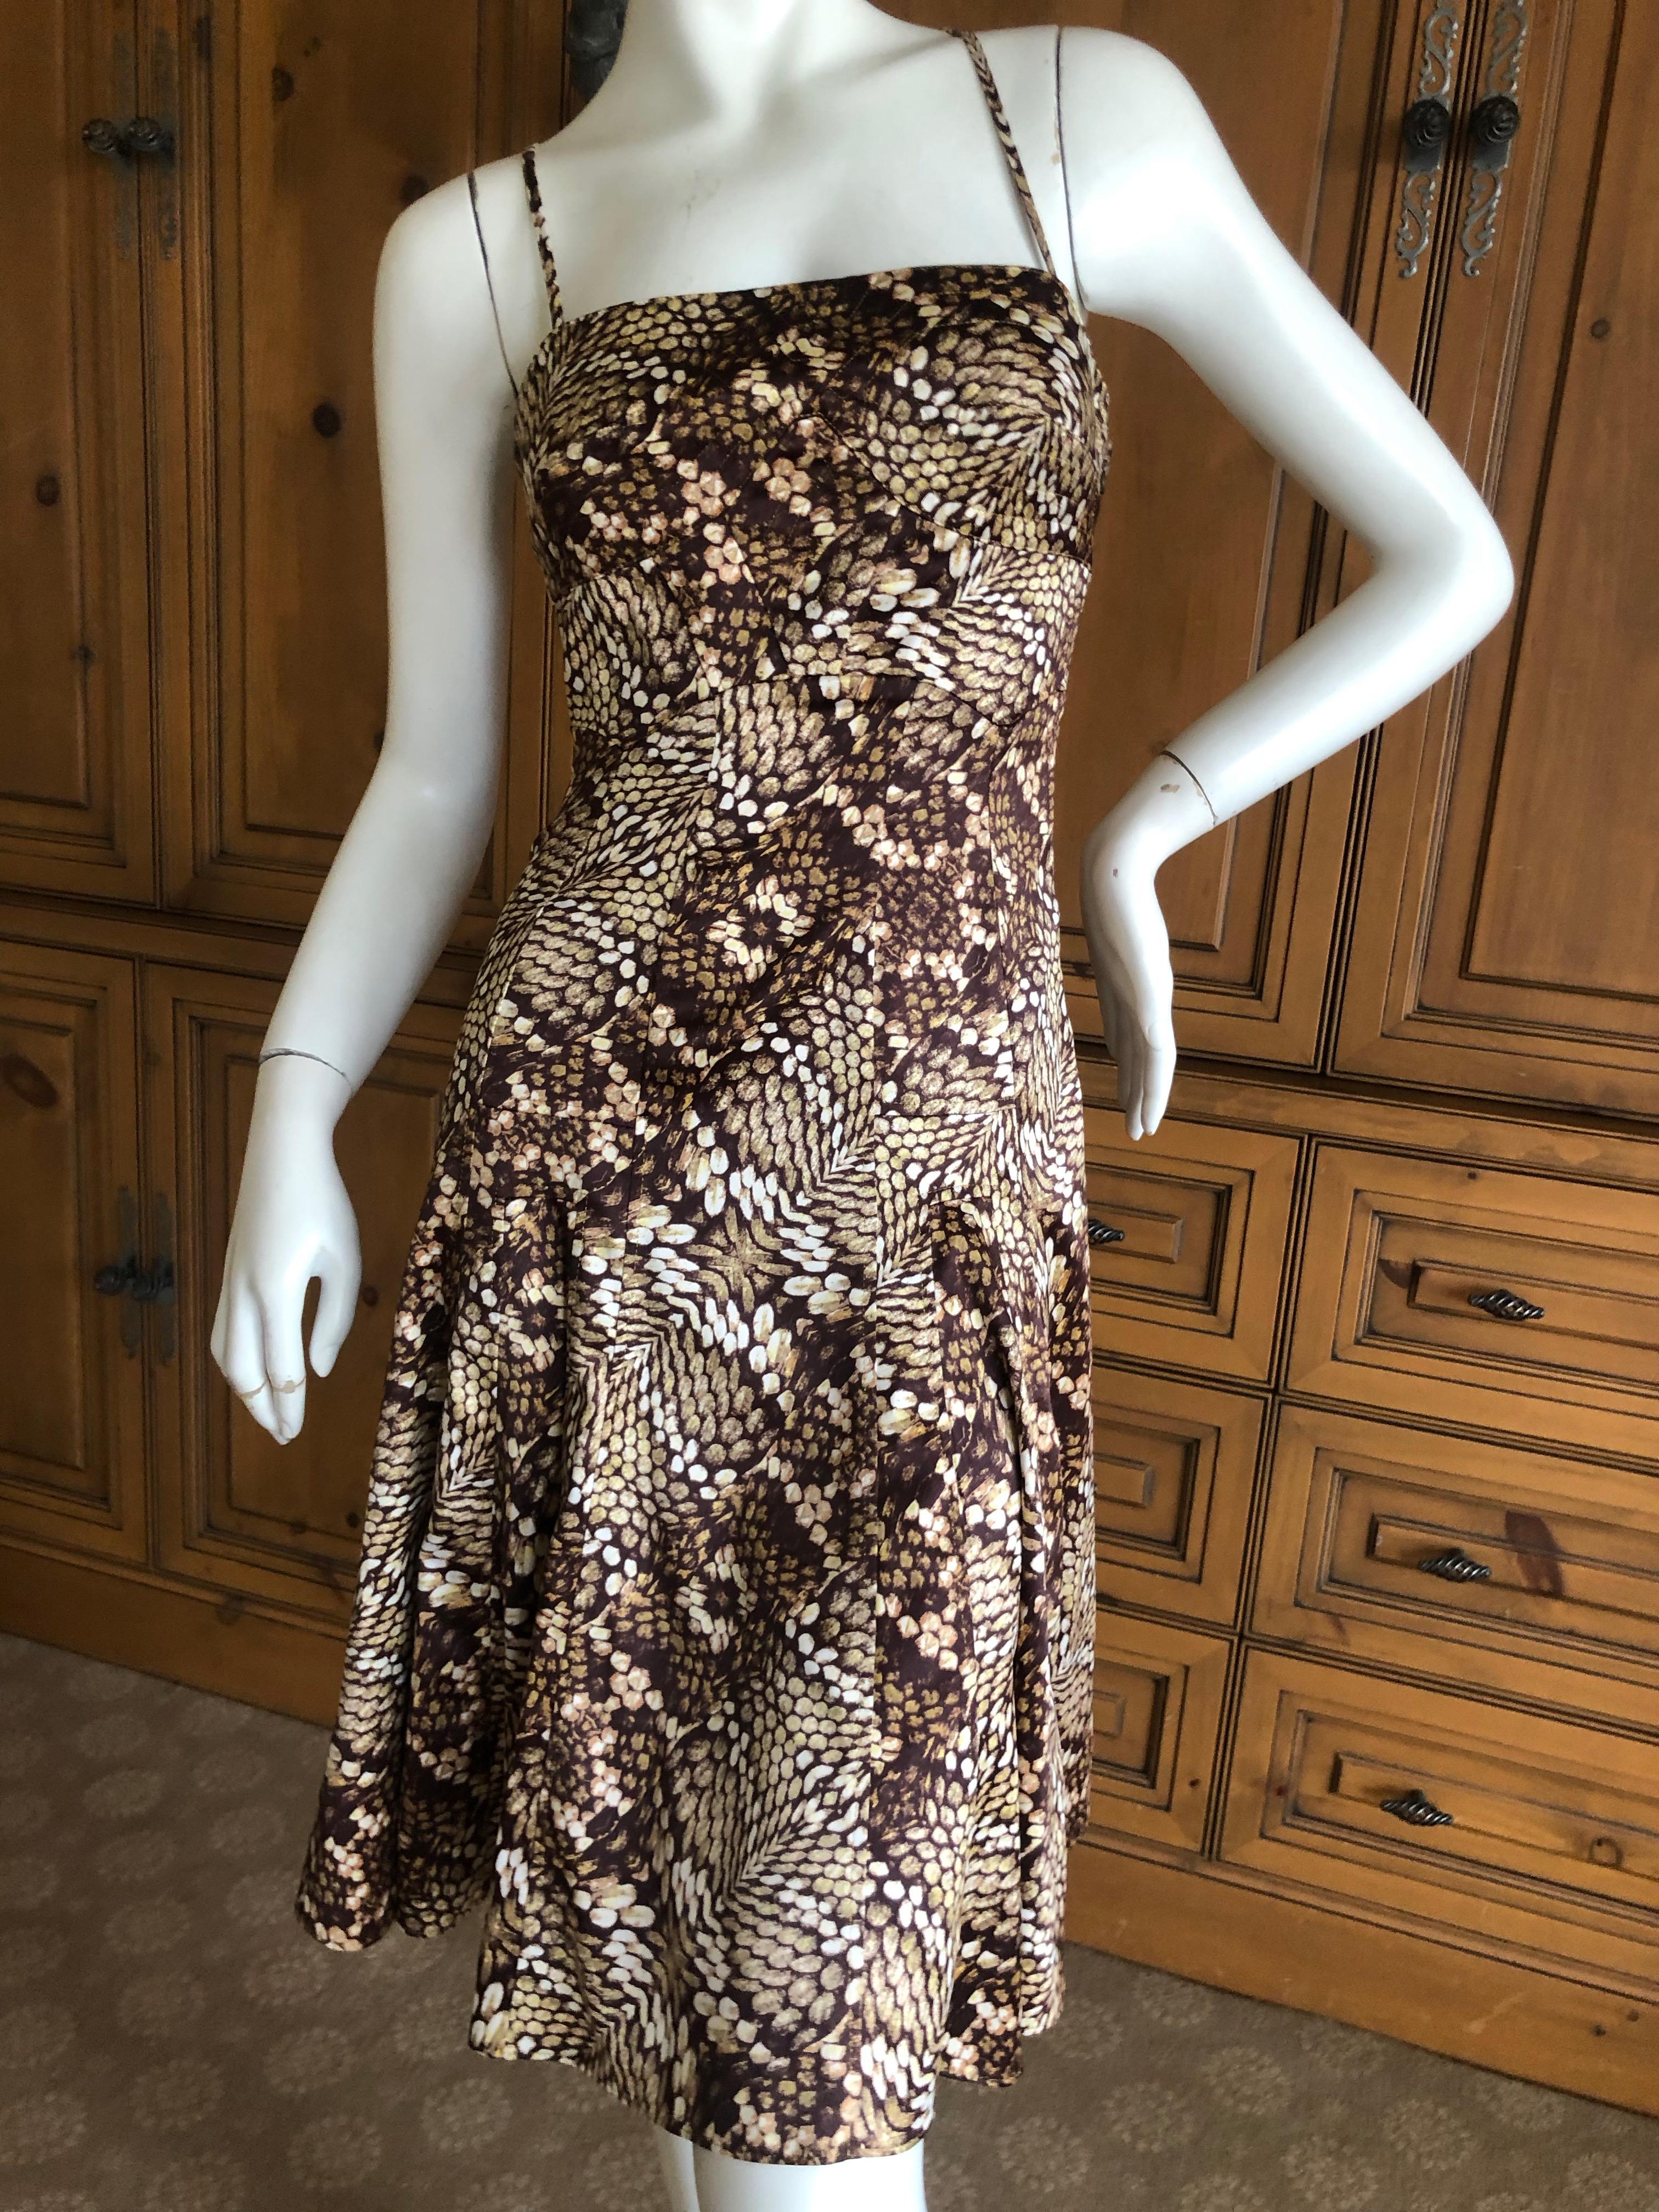 Just Cavalli by Roberto Cavalli Sweet Reptile Print Skater Skirt Mini Dress  In Excellent Condition For Sale In Cloverdale, CA